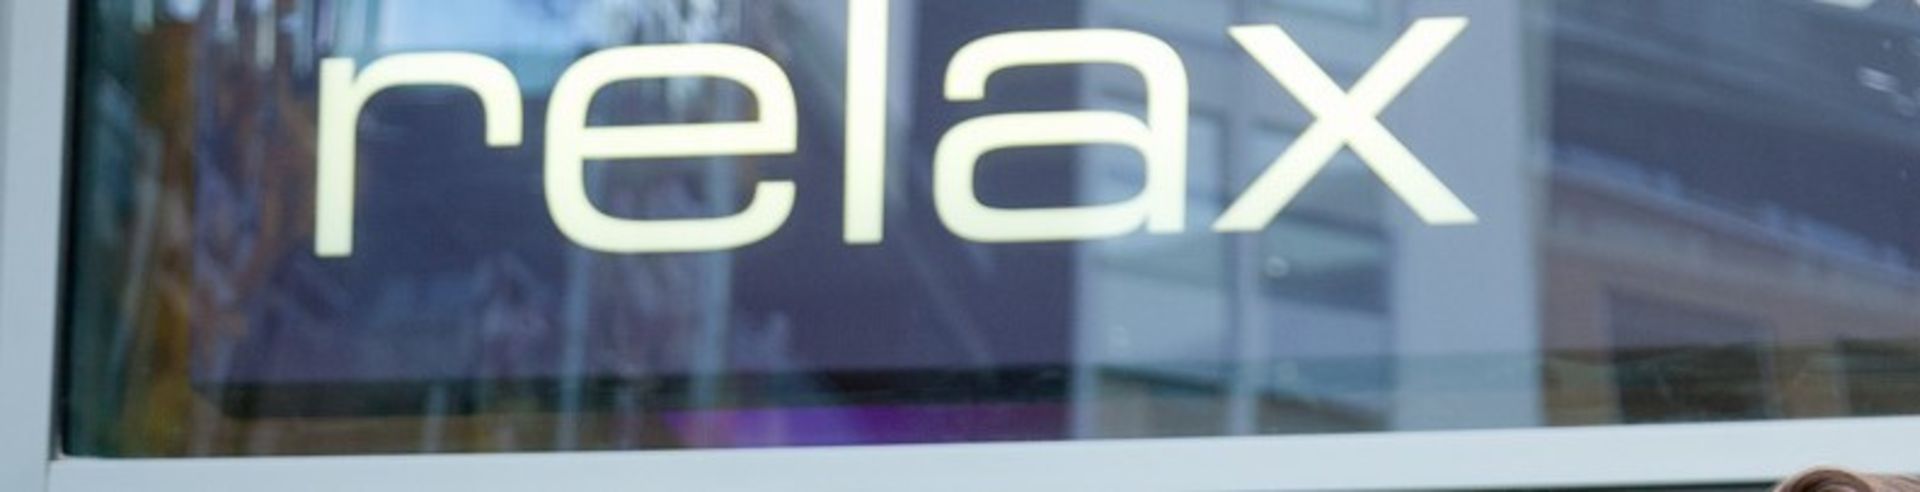 1 x Cool White RELAX Advertisement Illuminated Signage - Individual Perspex Letters Mounted on Rails - Image 4 of 5